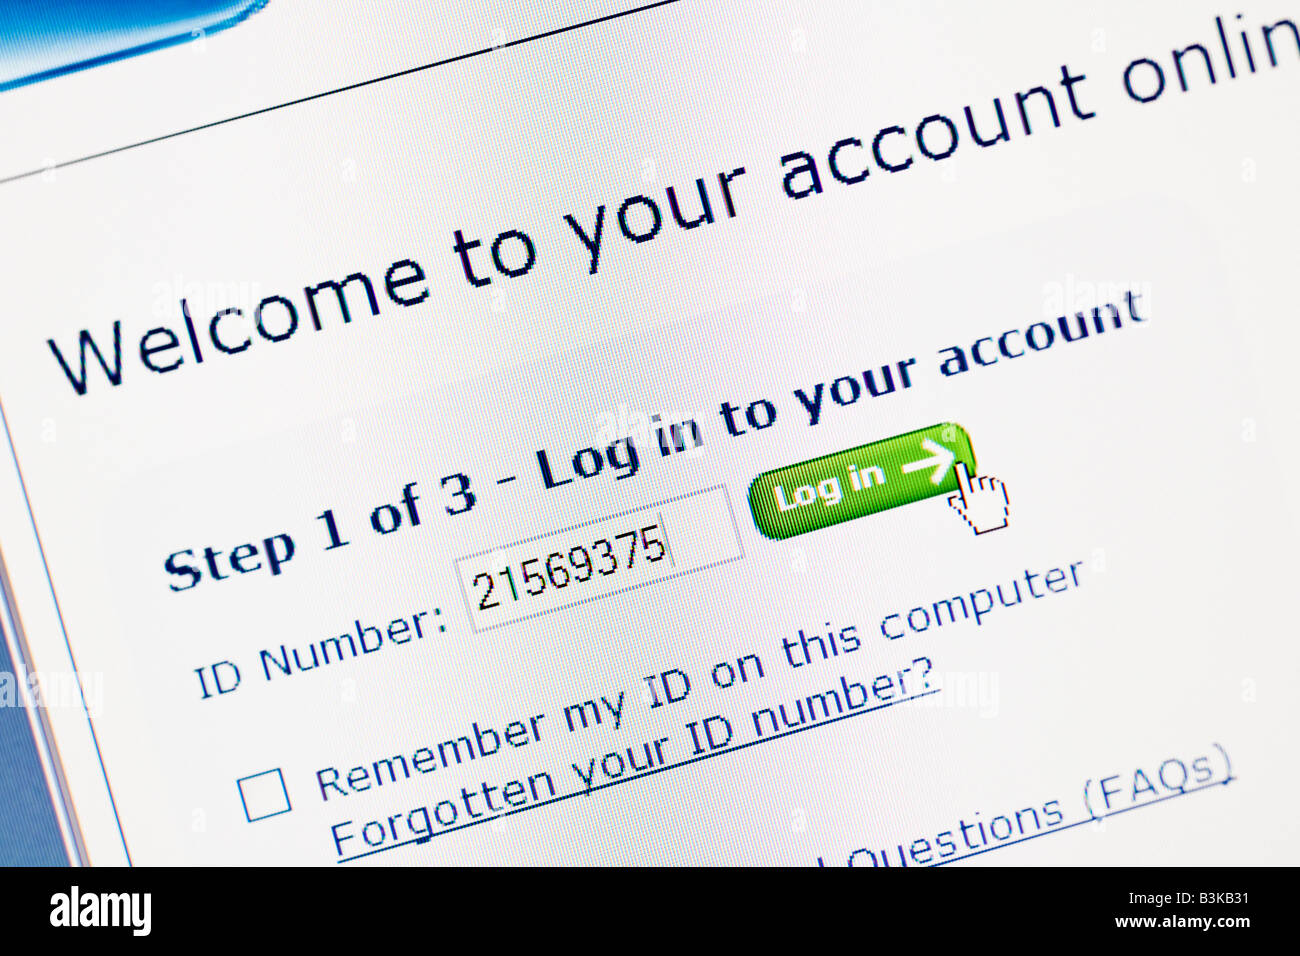 Online banking secure log on screens Stock Photo